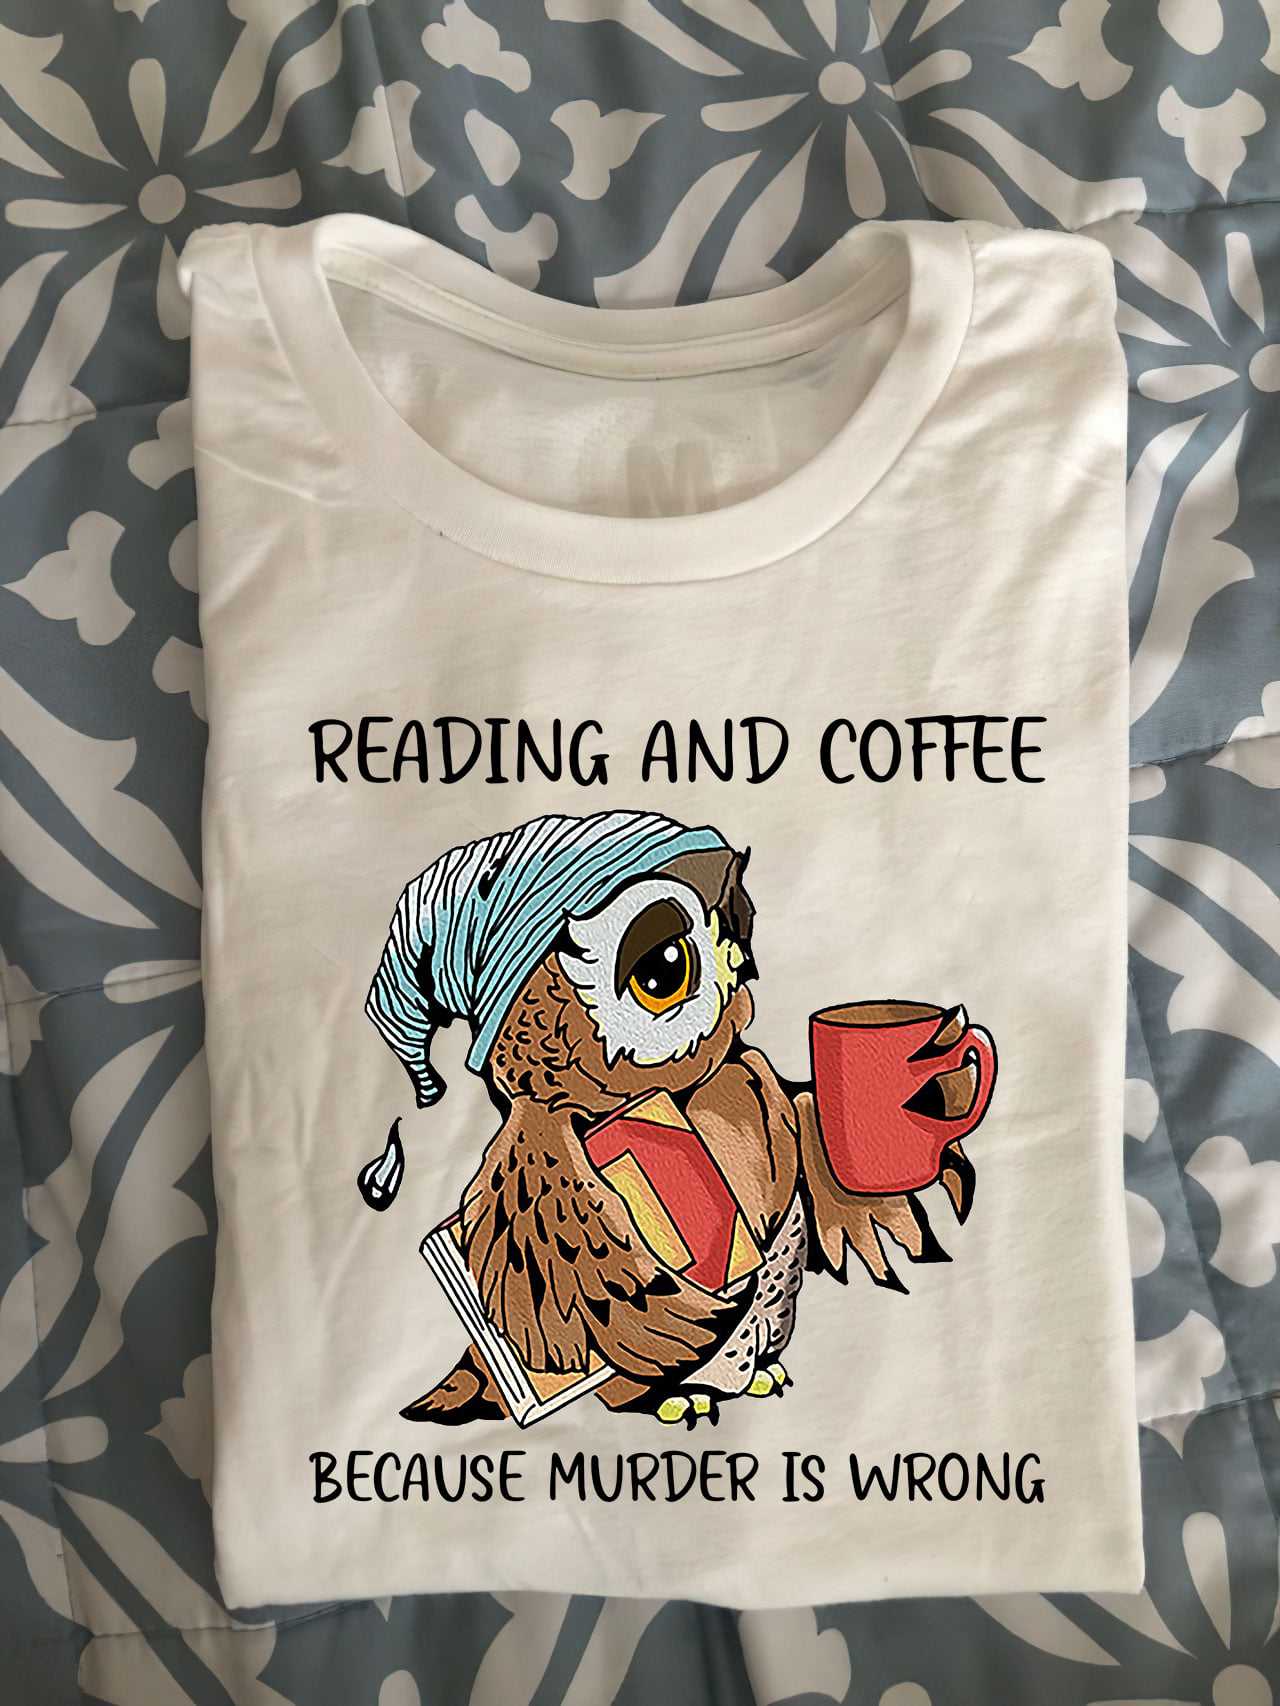 Reading and coffee because murder is wrong - Owl coffee and book, owl bookaholic